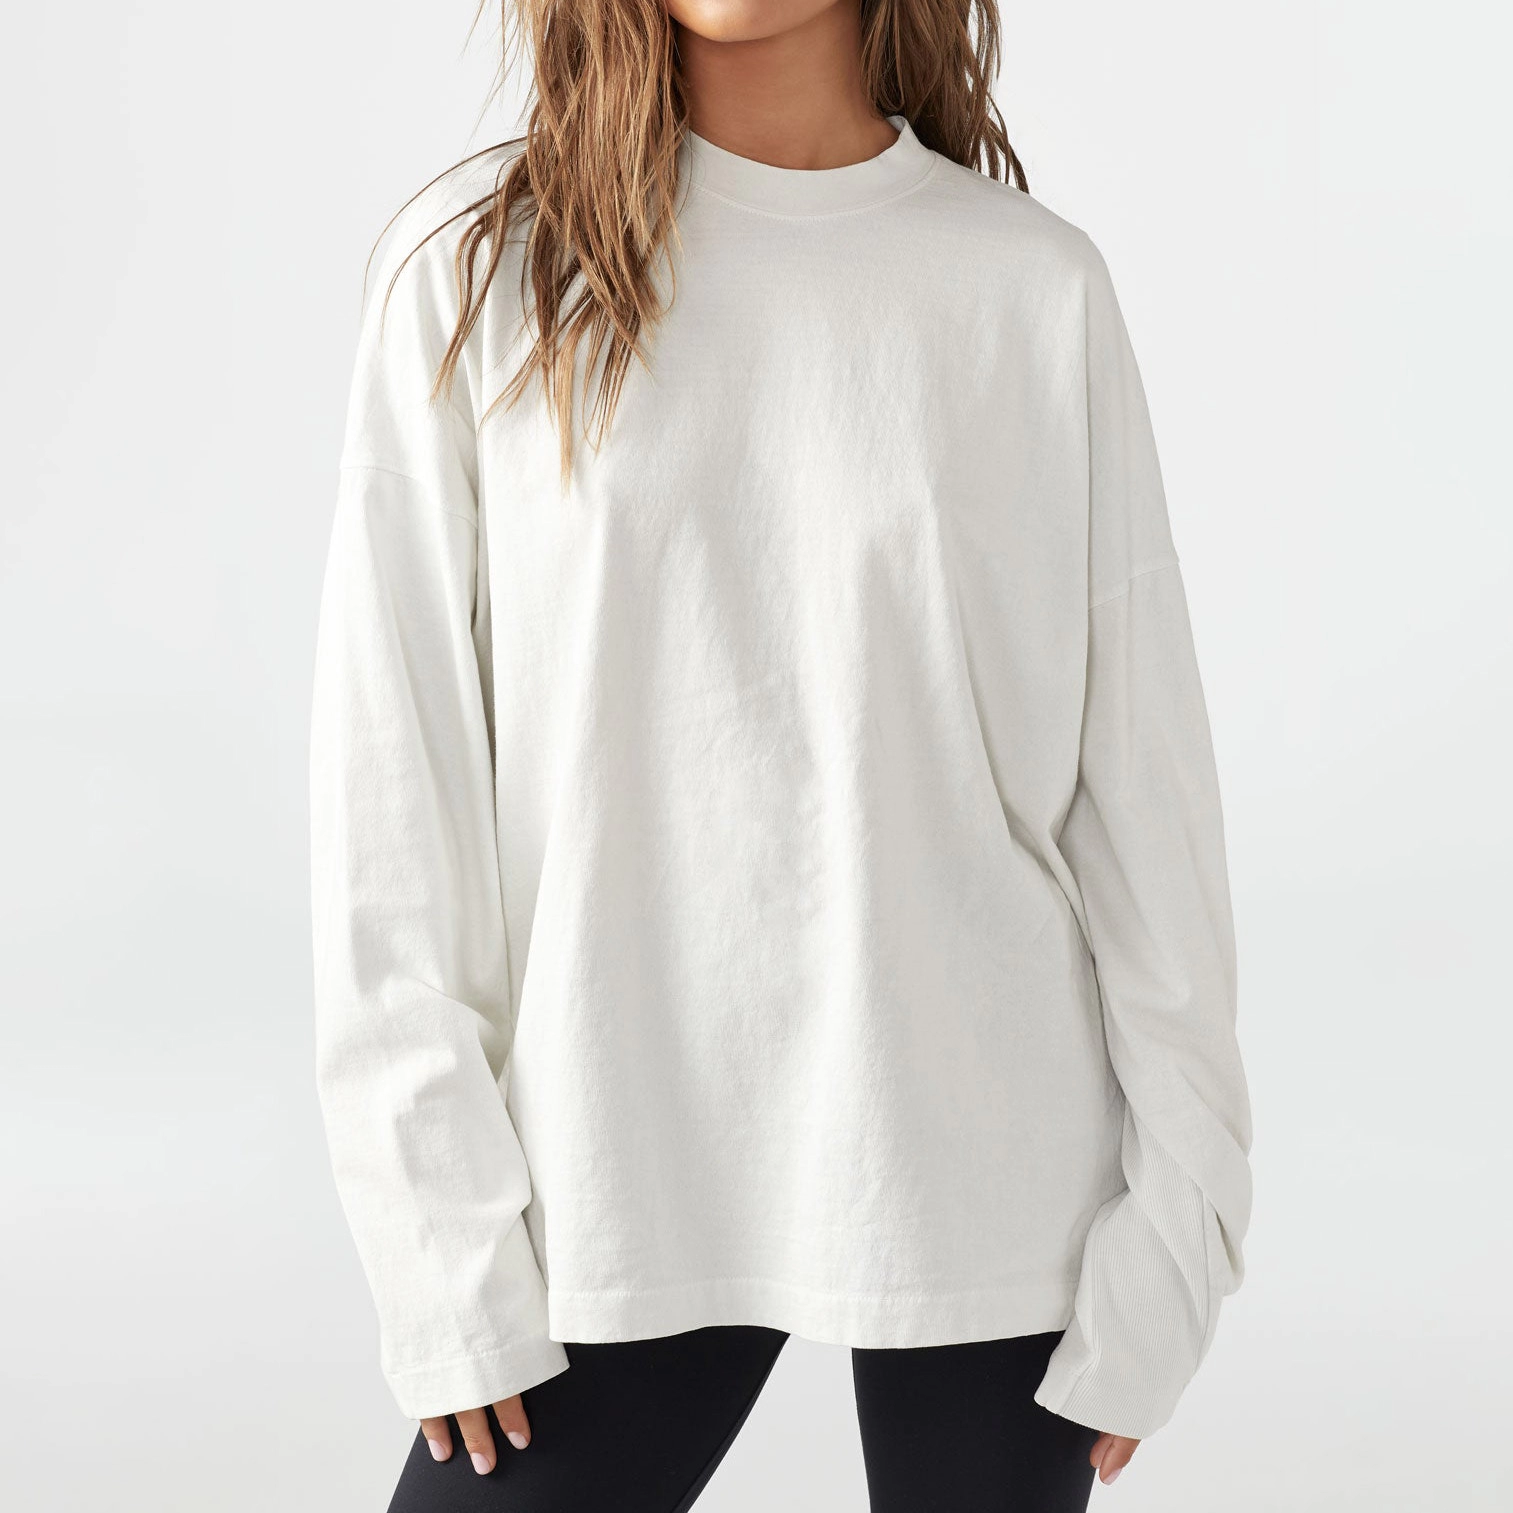 Oversize Fit Long Sleeve Top For Women